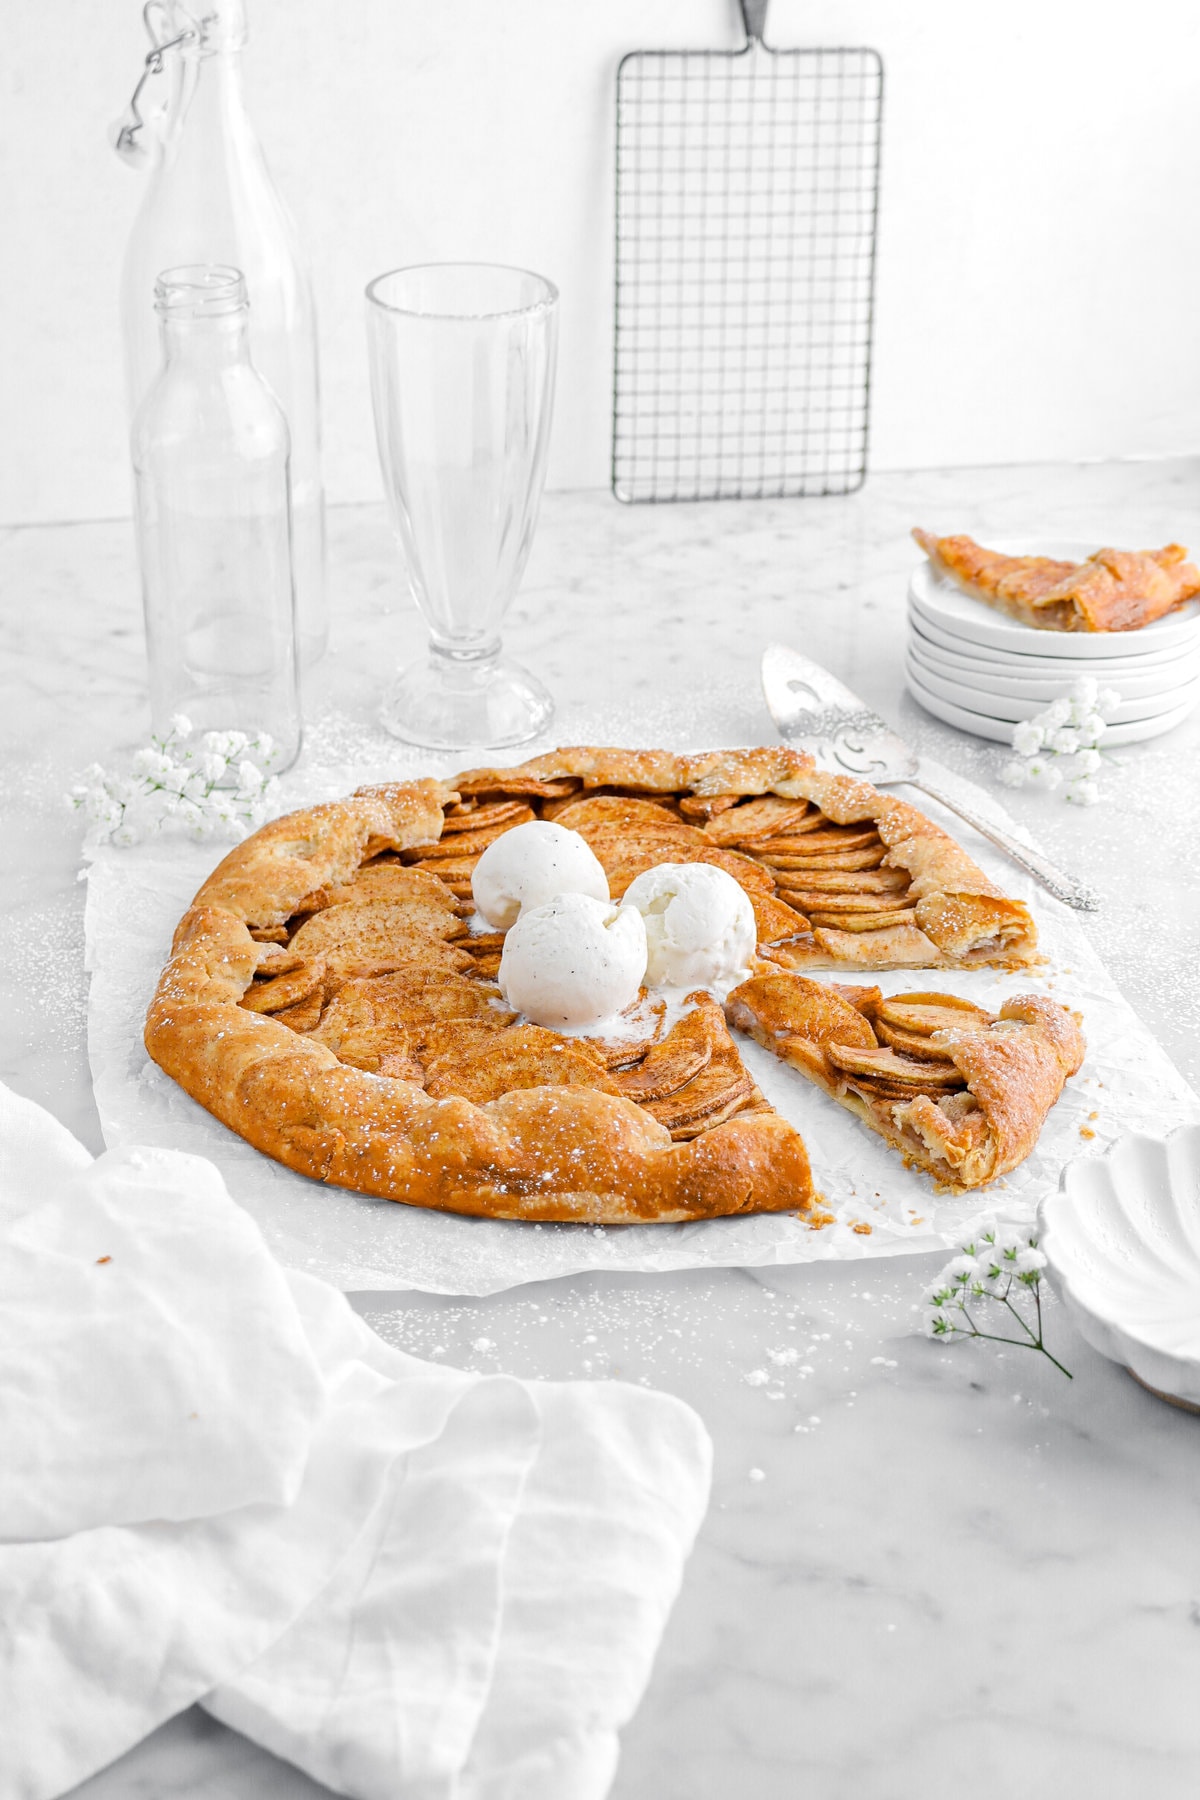 angled image of apple galette with three scoops of ice cream on parchment paper with slice cut into it and another slice behind on stack of white plates.